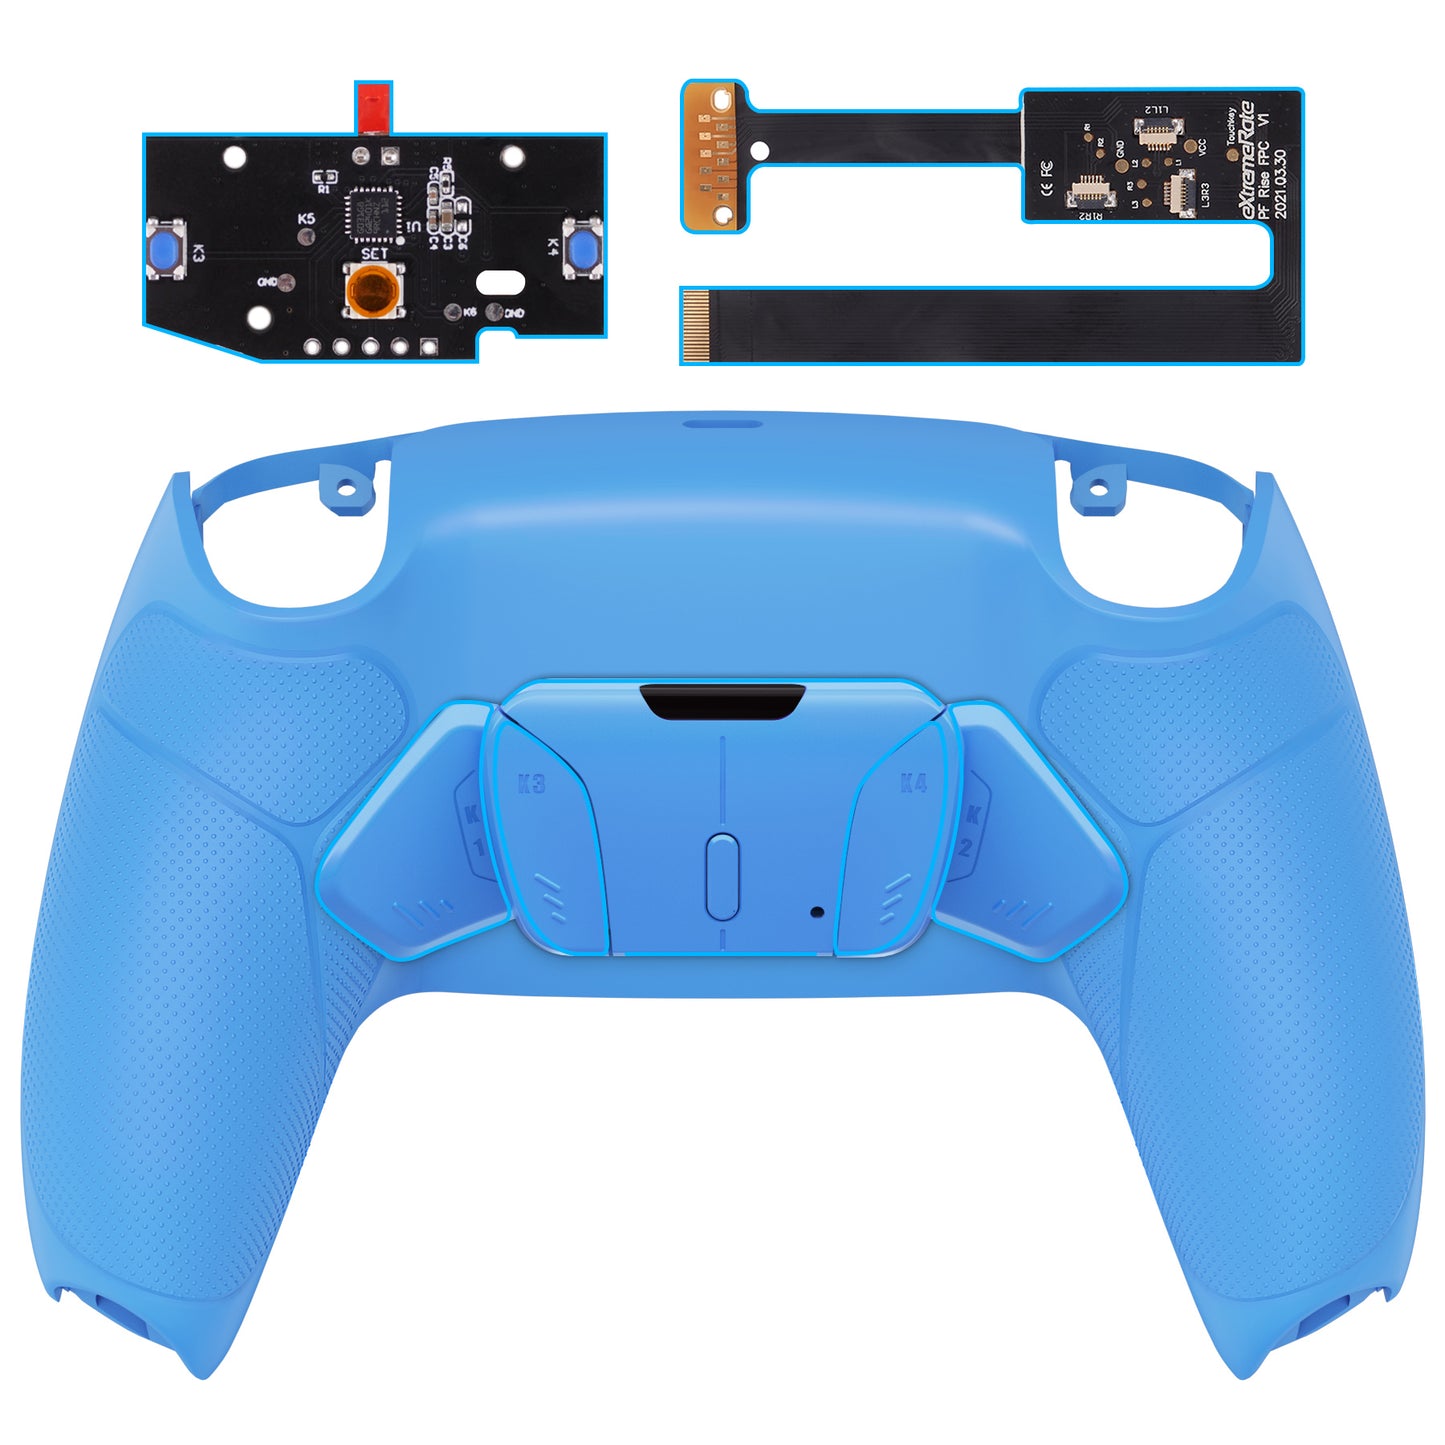 eXtremeRate Retail Starlight Blue Rubberized Grip Remappable RISE 4.0 Remap Kit for PS5 Controller BDM 010 & BDM 020, Upgrade Board & Redesigned Back Shell & 4 Back Buttons for PS5 Controller - Controller NOT Included - YPFU6006